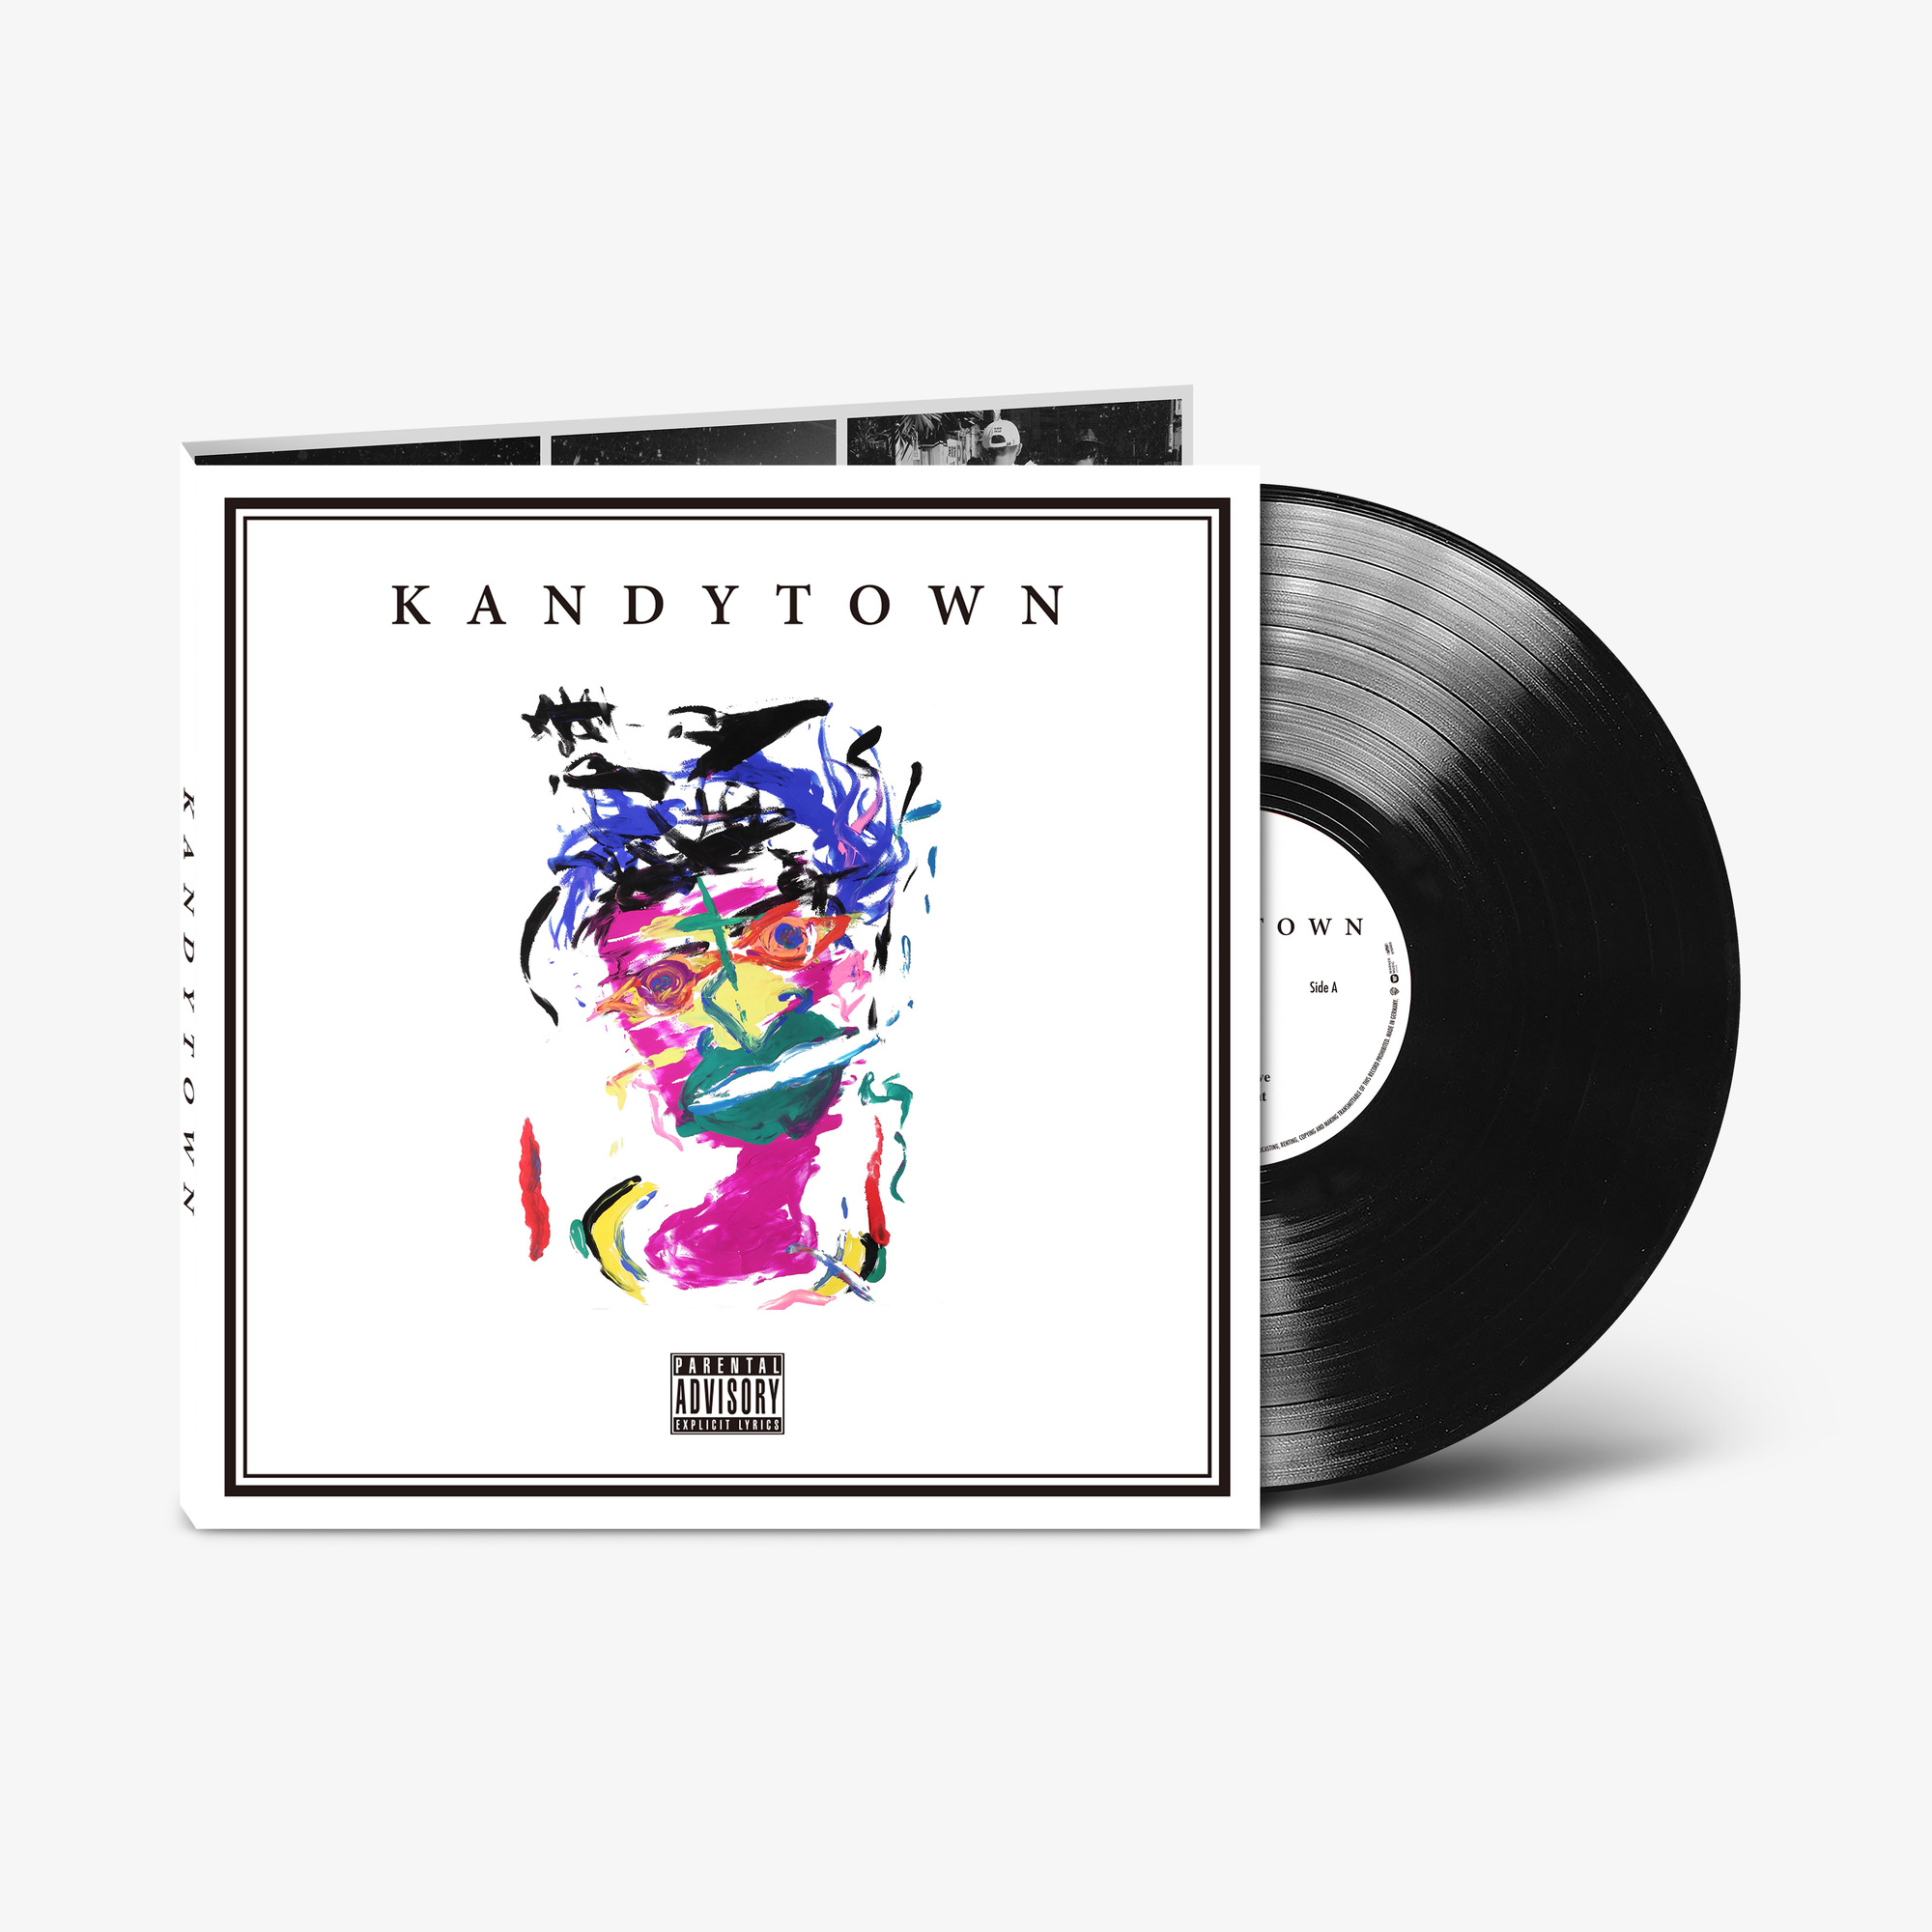 1st ALBUM「KANDYTOWN」(4LP)が数量限定で7月20日に再プレス決定 